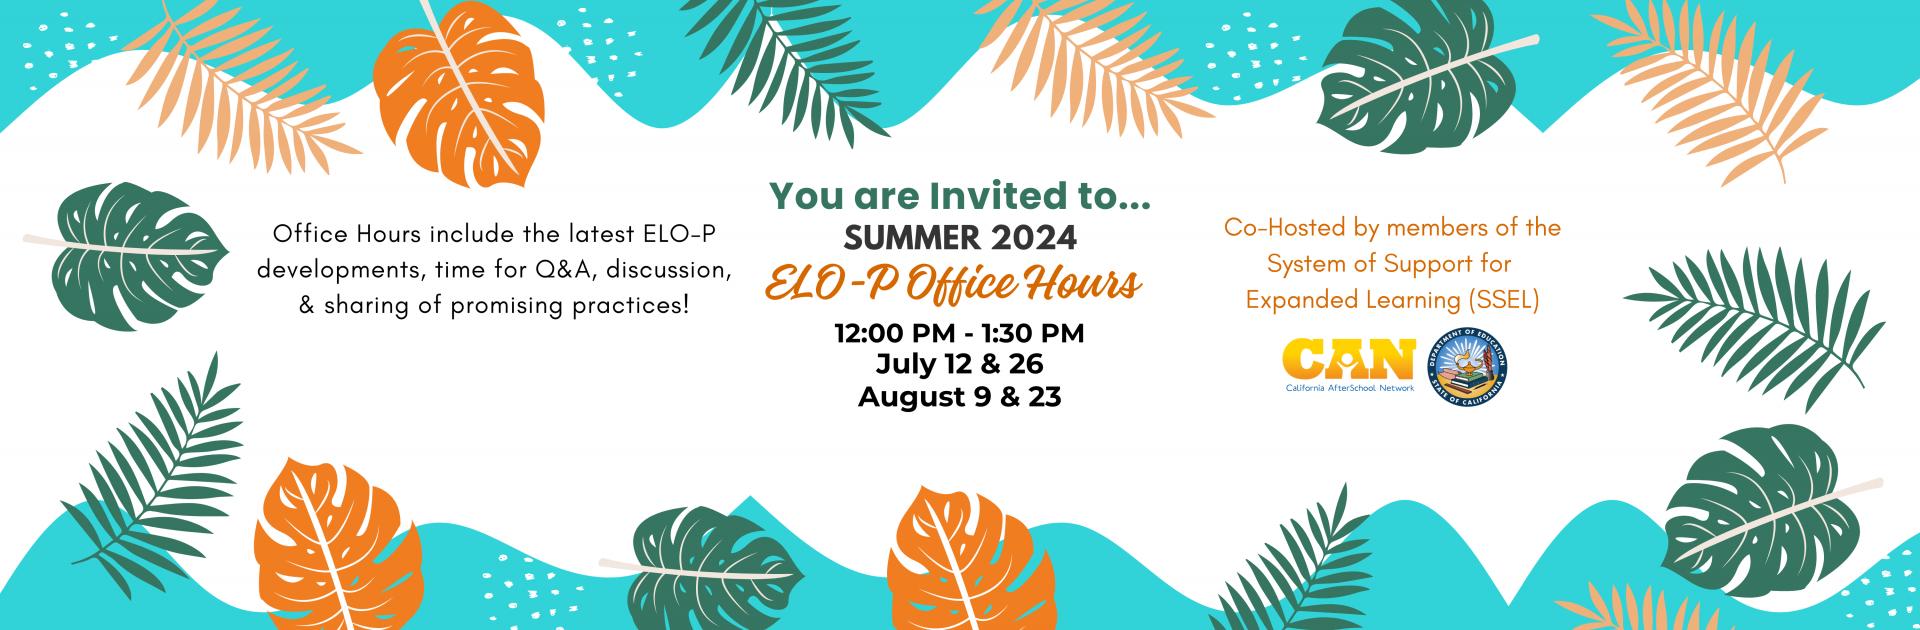 Summer 2024 ELO-P Office Hours 12:00 PM - 1:30 PM July 12 & 26 August 9 & 23, Co-Hosted by members of the System of Support for Expanded Learning (SSEL) 